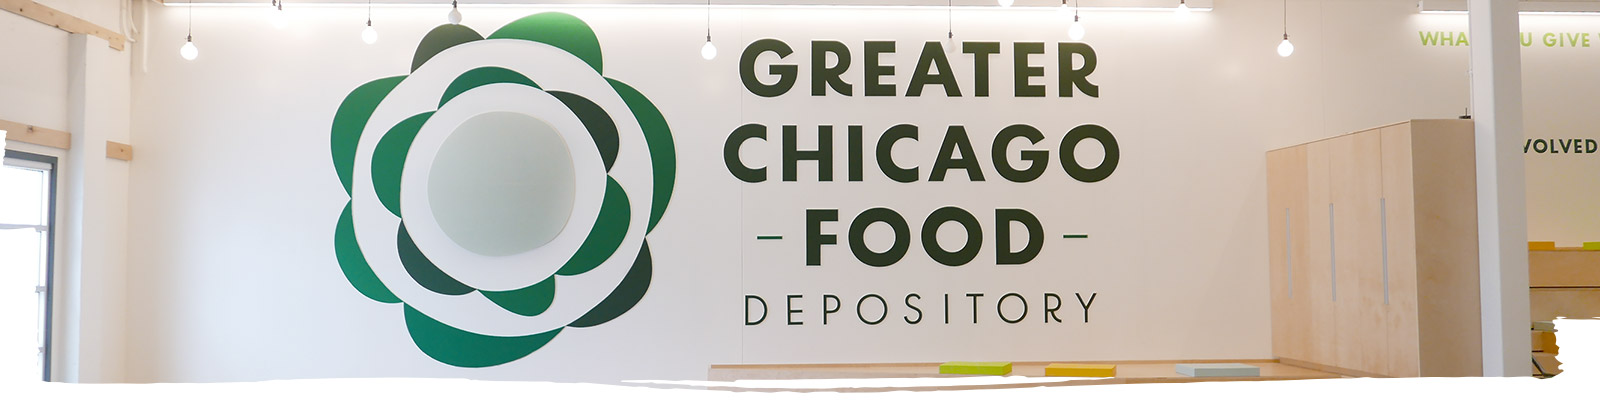 Greater Chicago Food